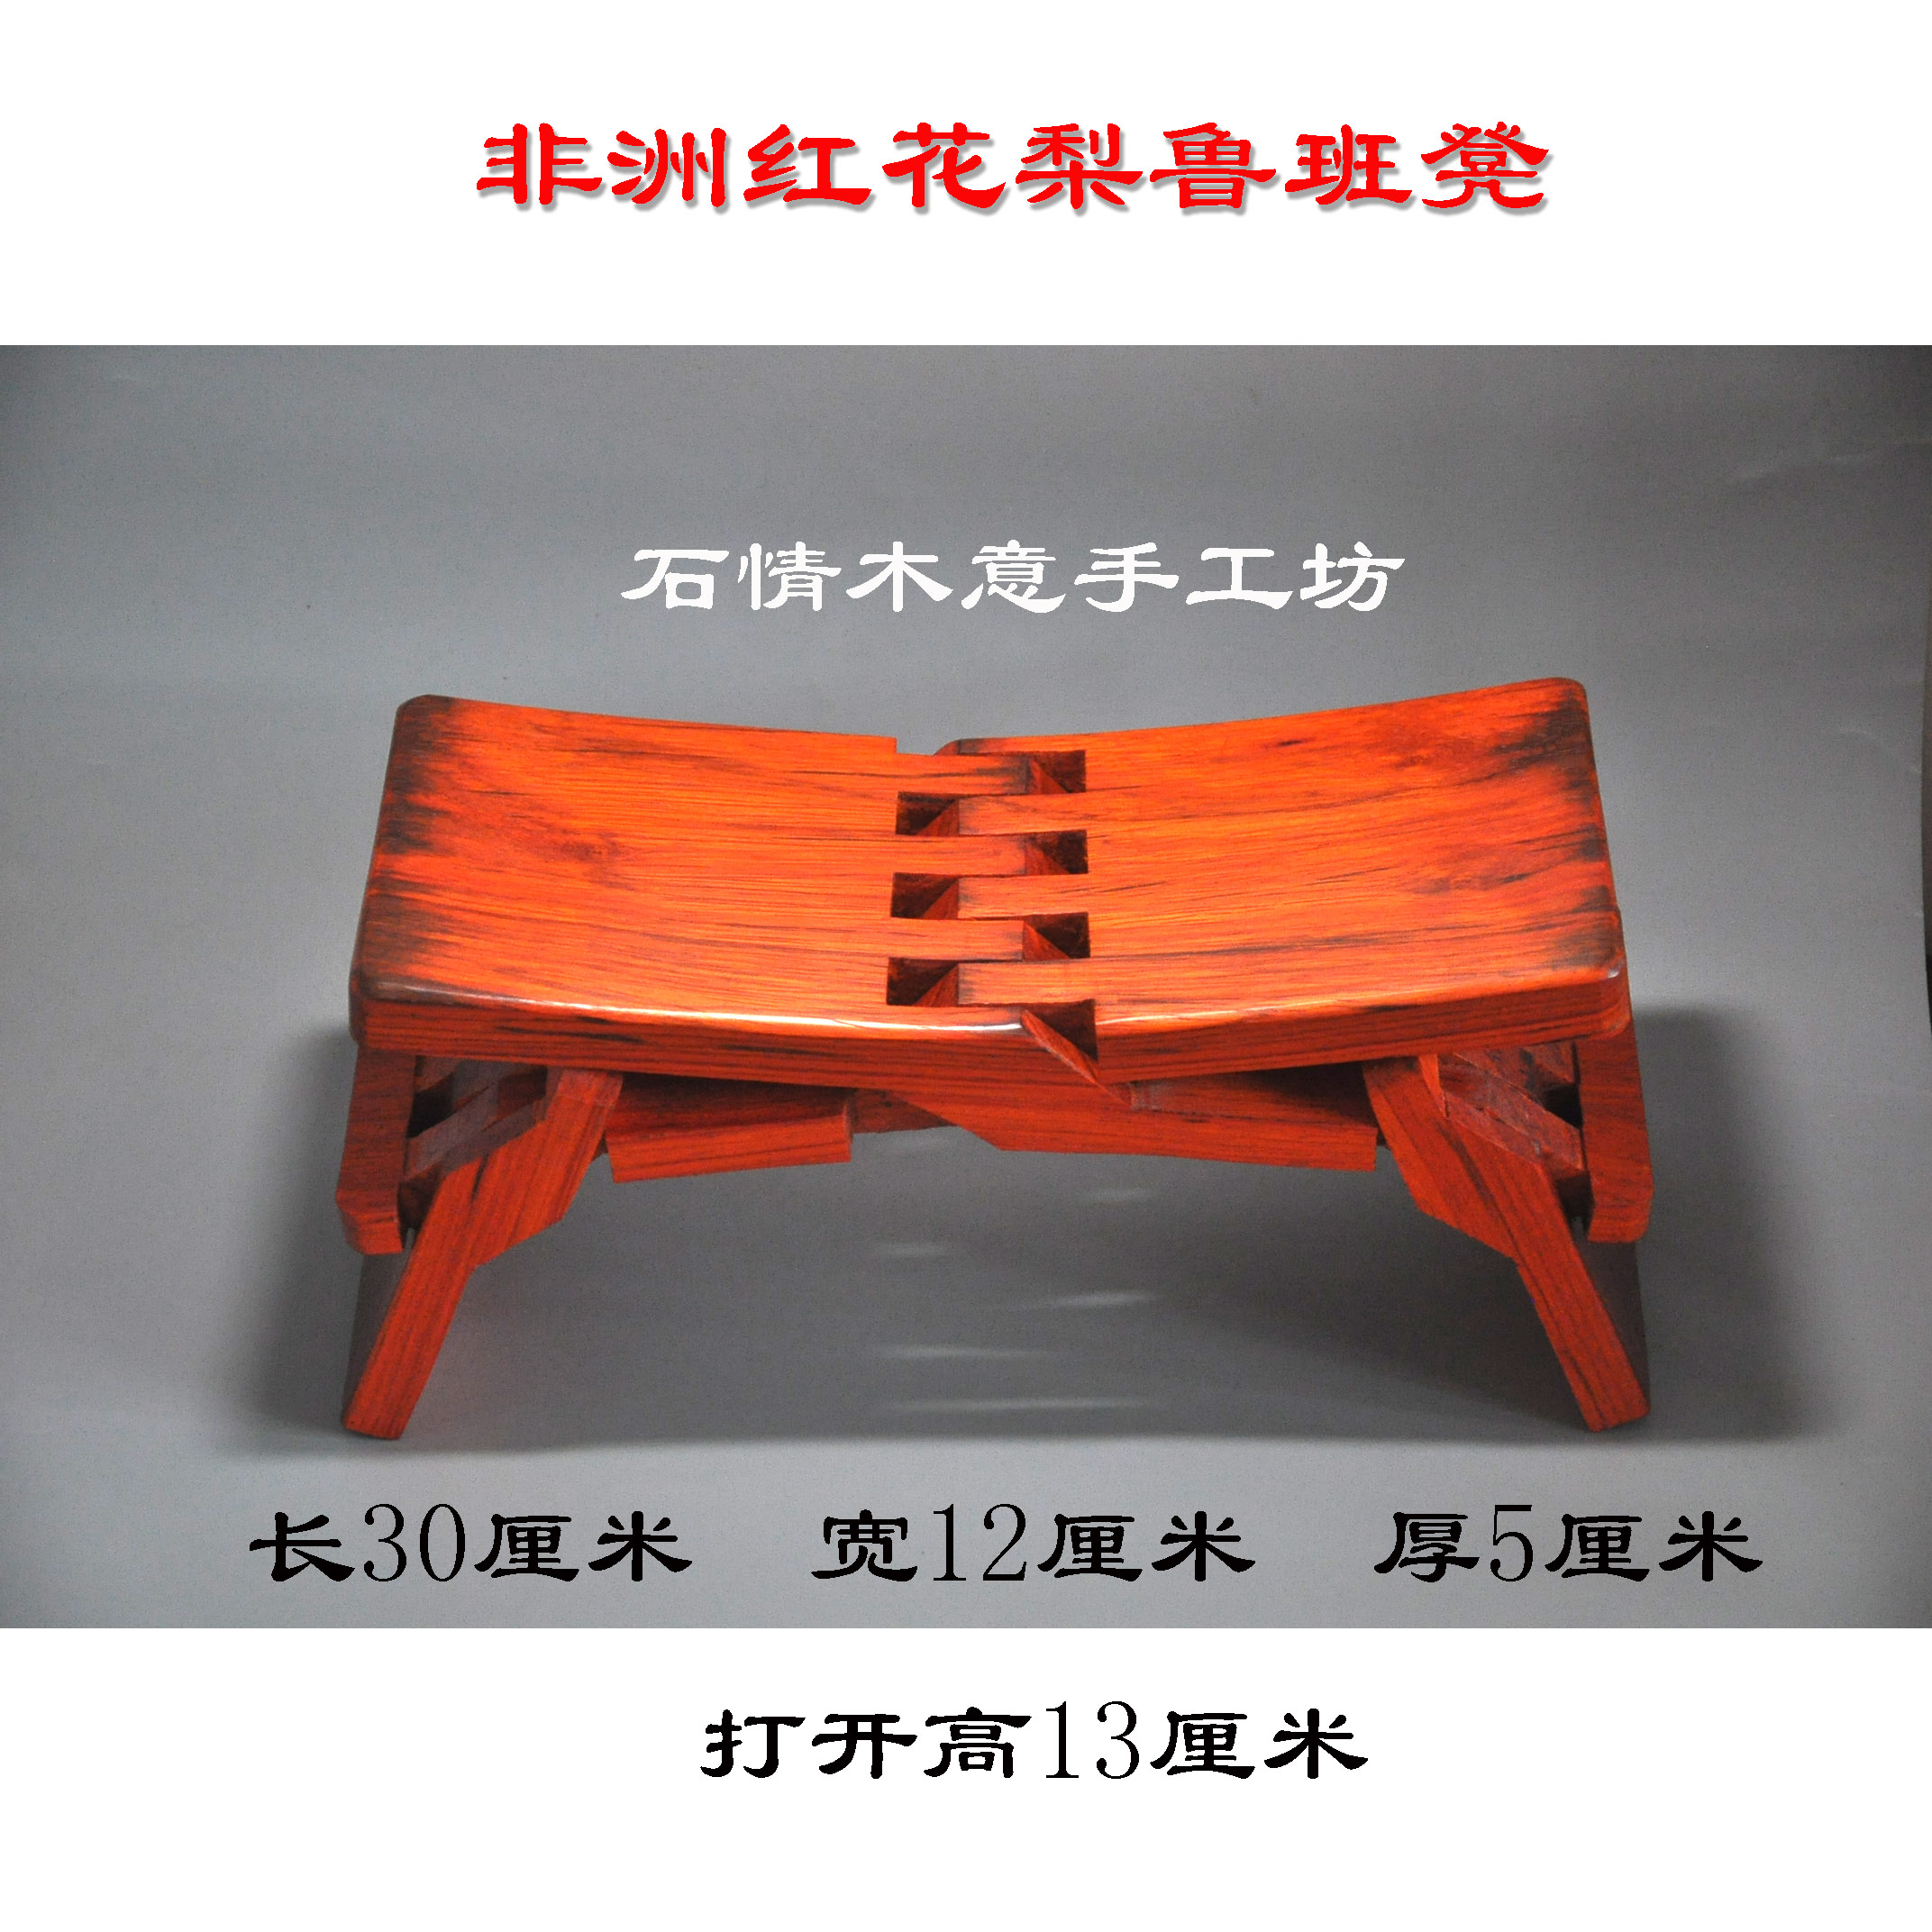 Luban stool Luban pillow nonsense traditional handmade collection gifts Safflower pear wood carving wood handicraft